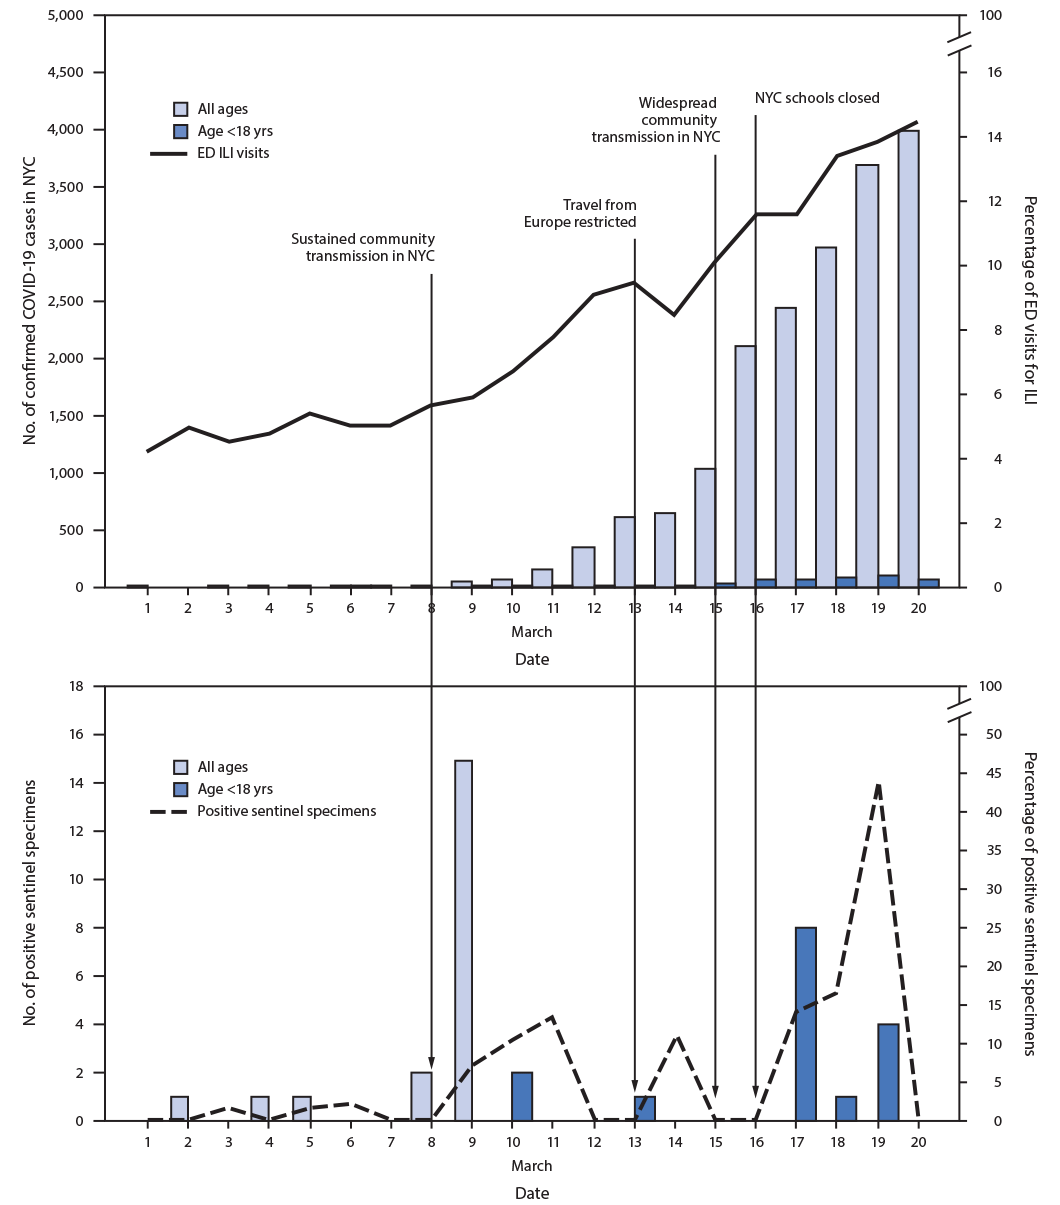 The figure consists of  two bar graphs showing the daily percentage of emergency department visits for influenza-like illness, number of confirmed COVID-19 cases, and number and percentage of sentinel specimens positive for SARS-CoV-2 in New York City during March 1–20, 2020.